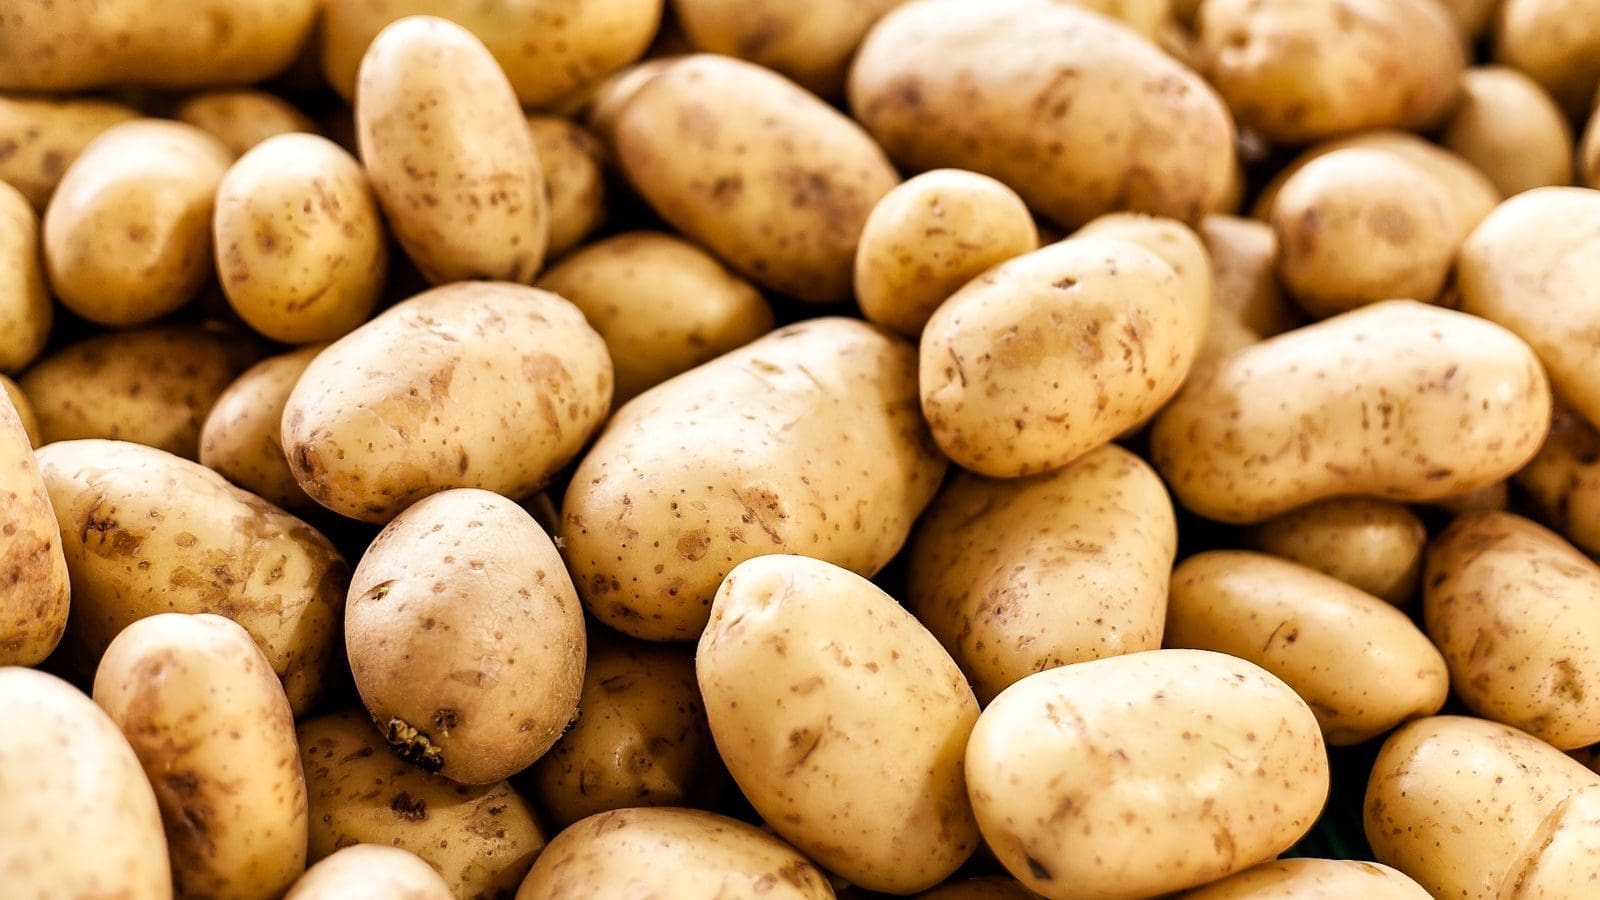 Zimbabwe pursues self-reliance in potato production as staggering data shows 395% growth in imports